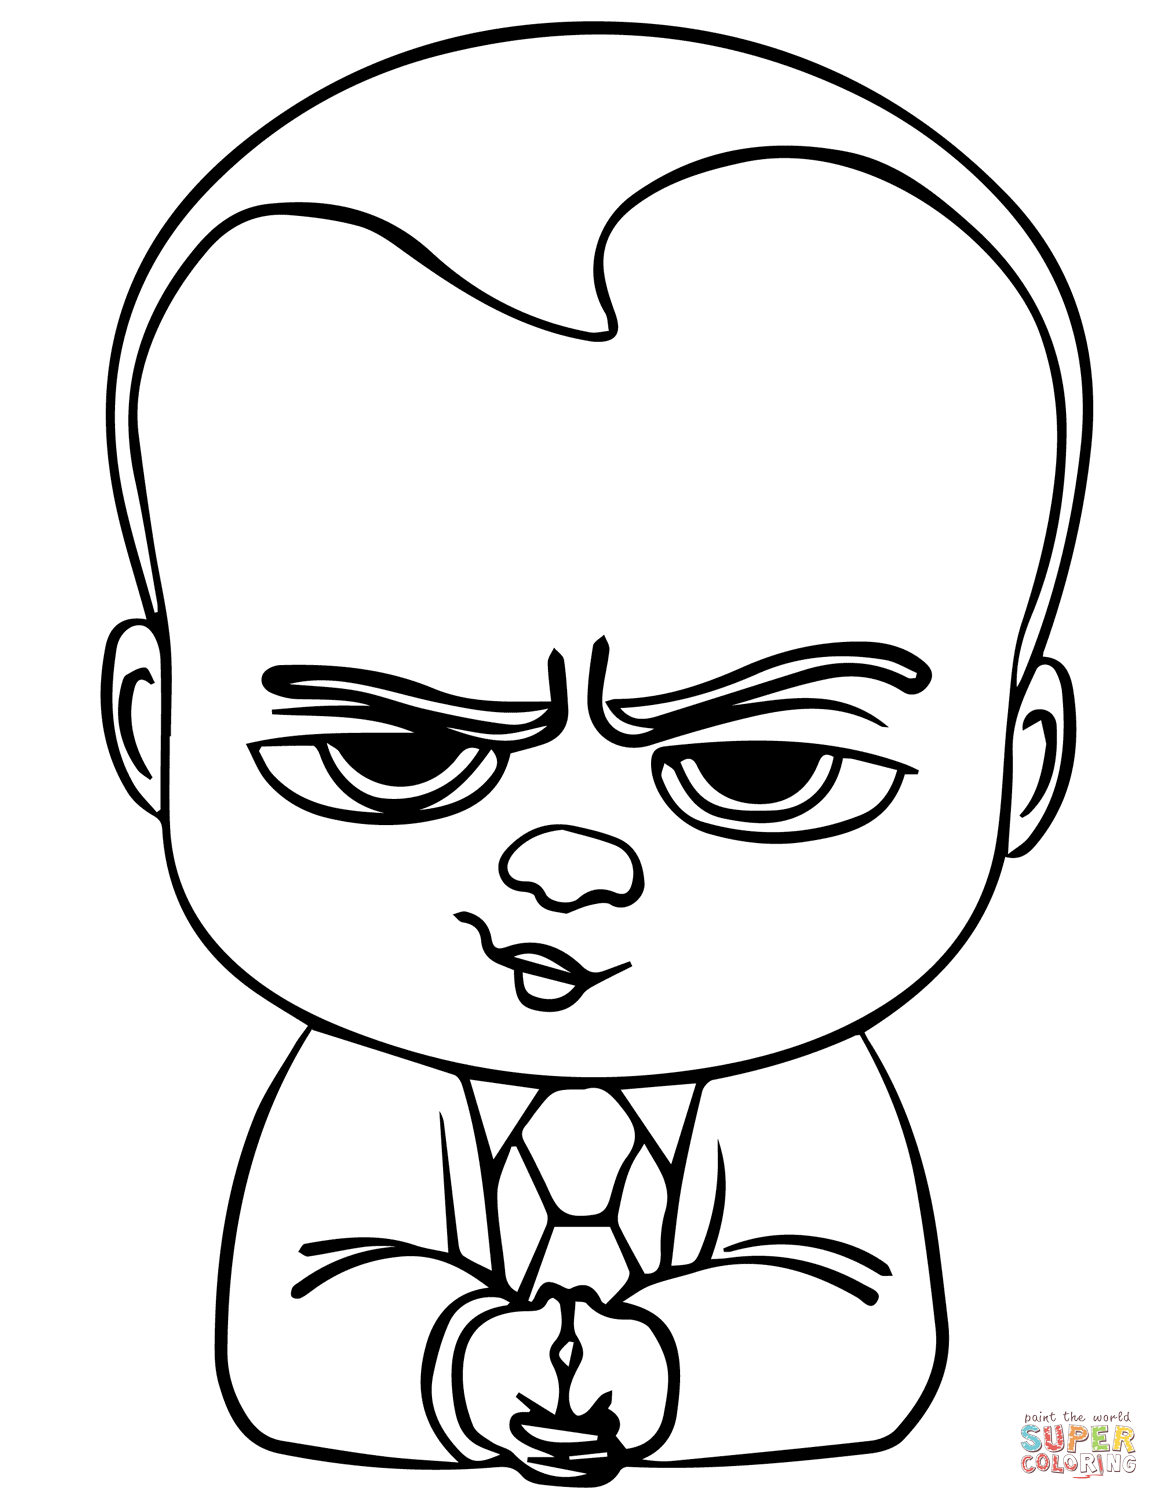 The Boss Baby Coloring Page | Free Printable Coloring Pages intérieur Coloriage Baby Boss A Imprimer